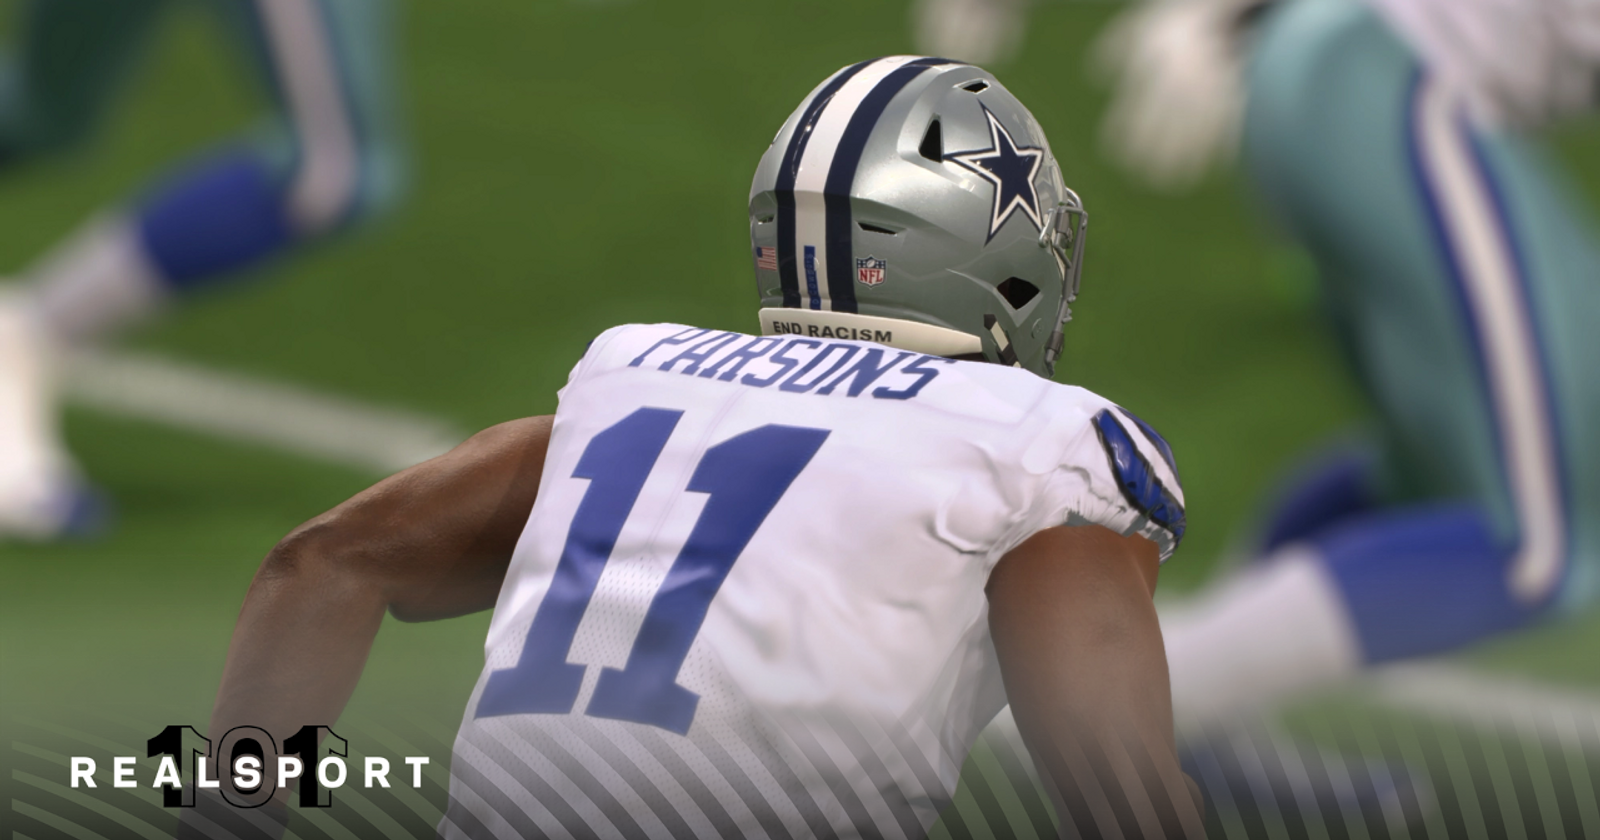 Madden 23 Ratings Update boosts four players thanks to Ratings